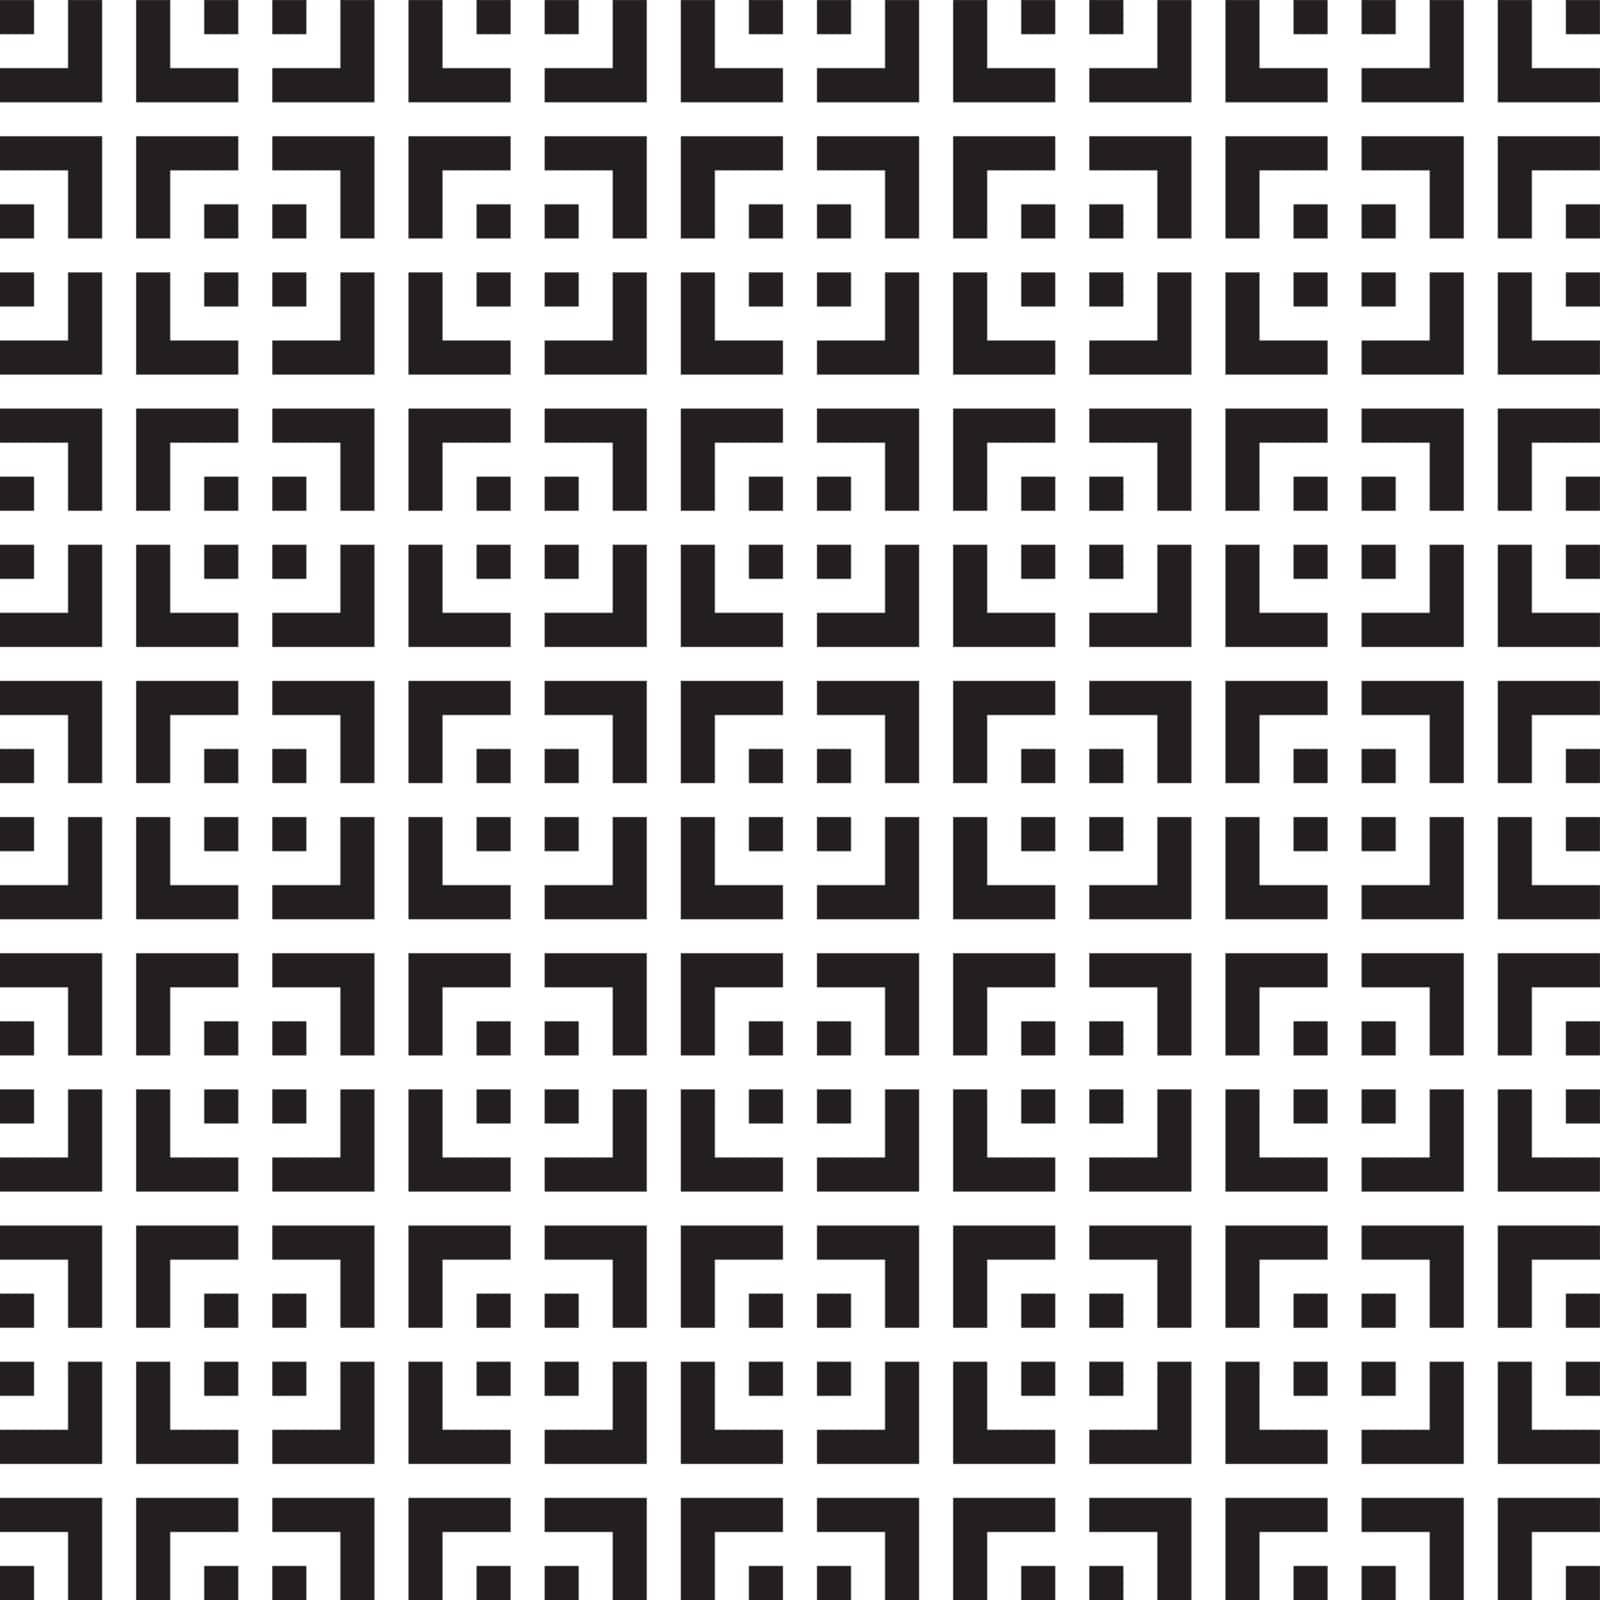 Abstract seamless pattern background. Maze of black geometric design elements isolated on white background. Vector illustration.